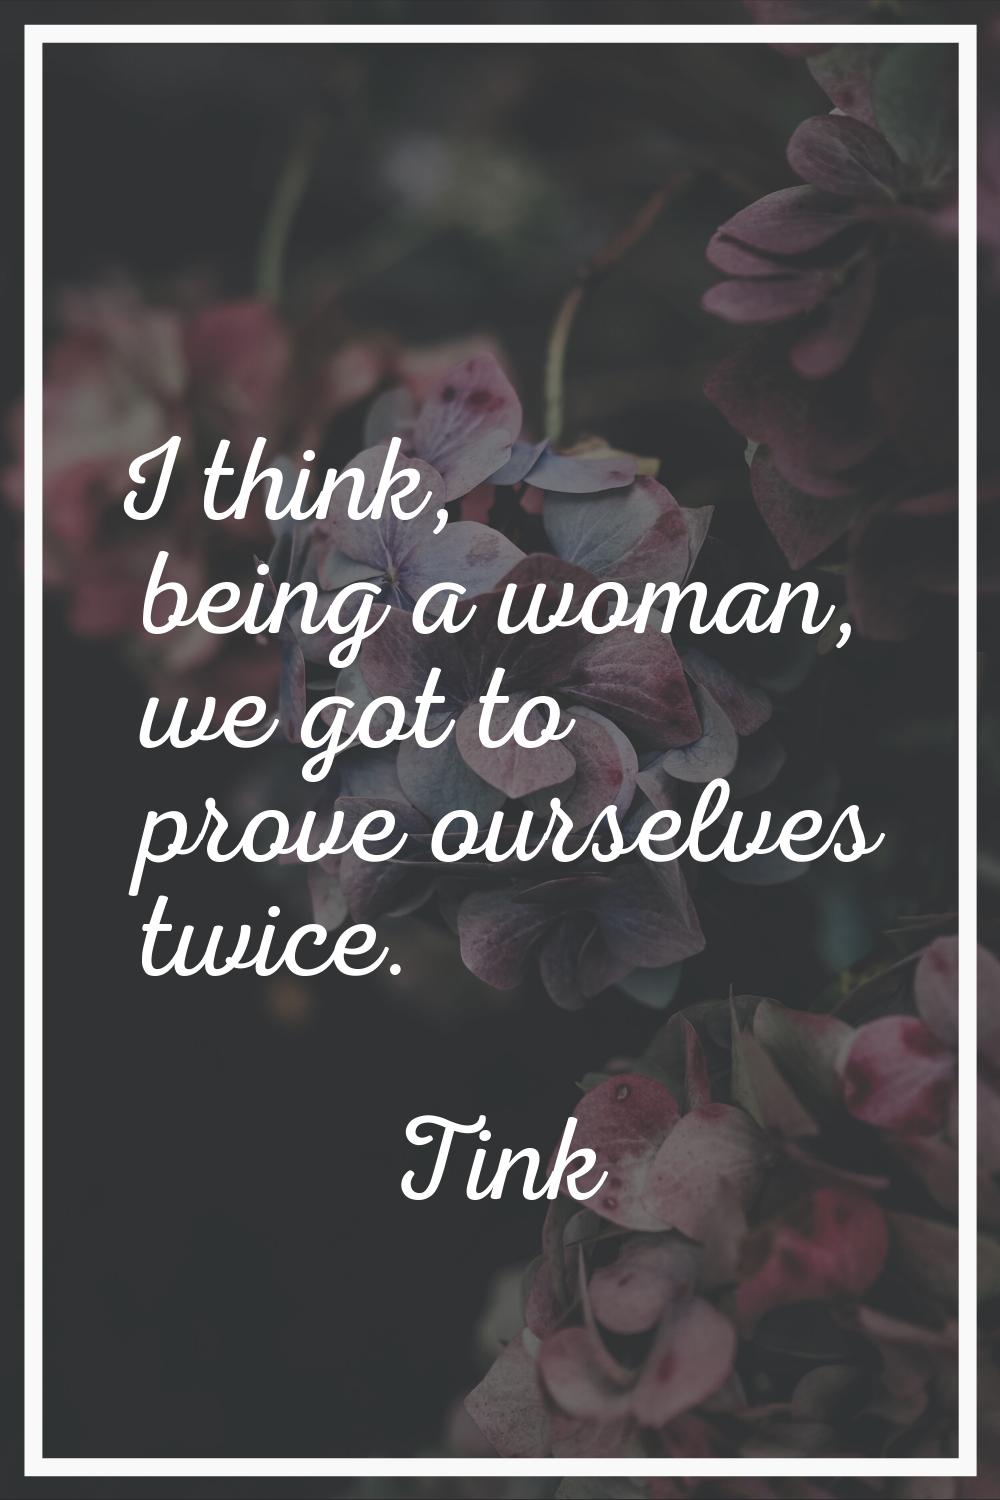 I think, being a woman, we got to prove ourselves twice.